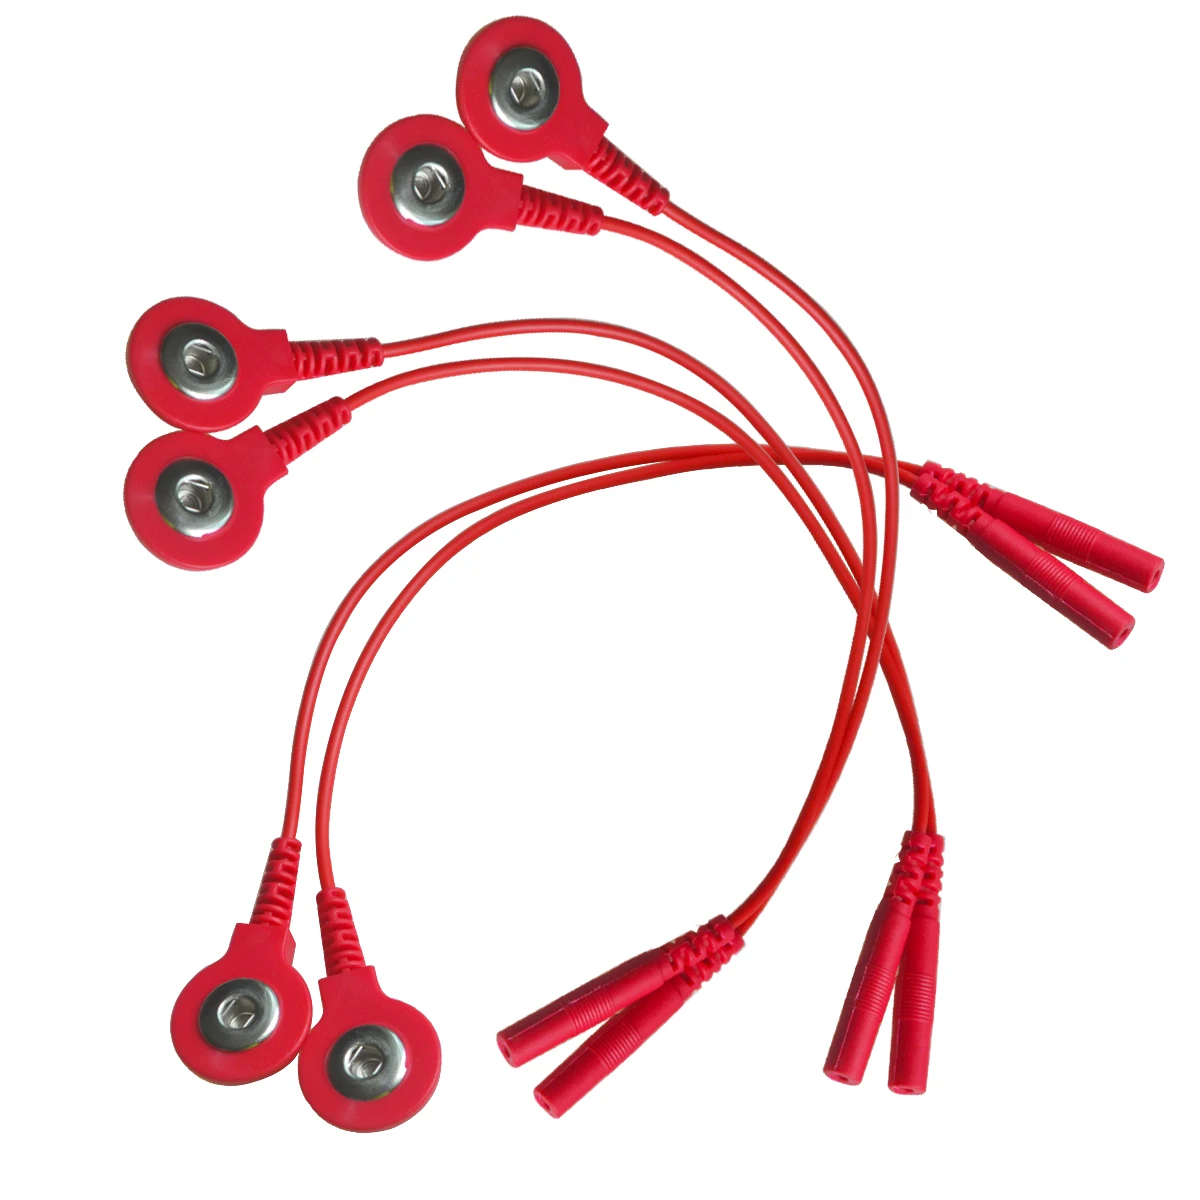 

50 Pairs Red Digital Electrode Lead Wires Electrotherapy Connecting Cables TENS Machine Massager Wire Plug 2.0mm